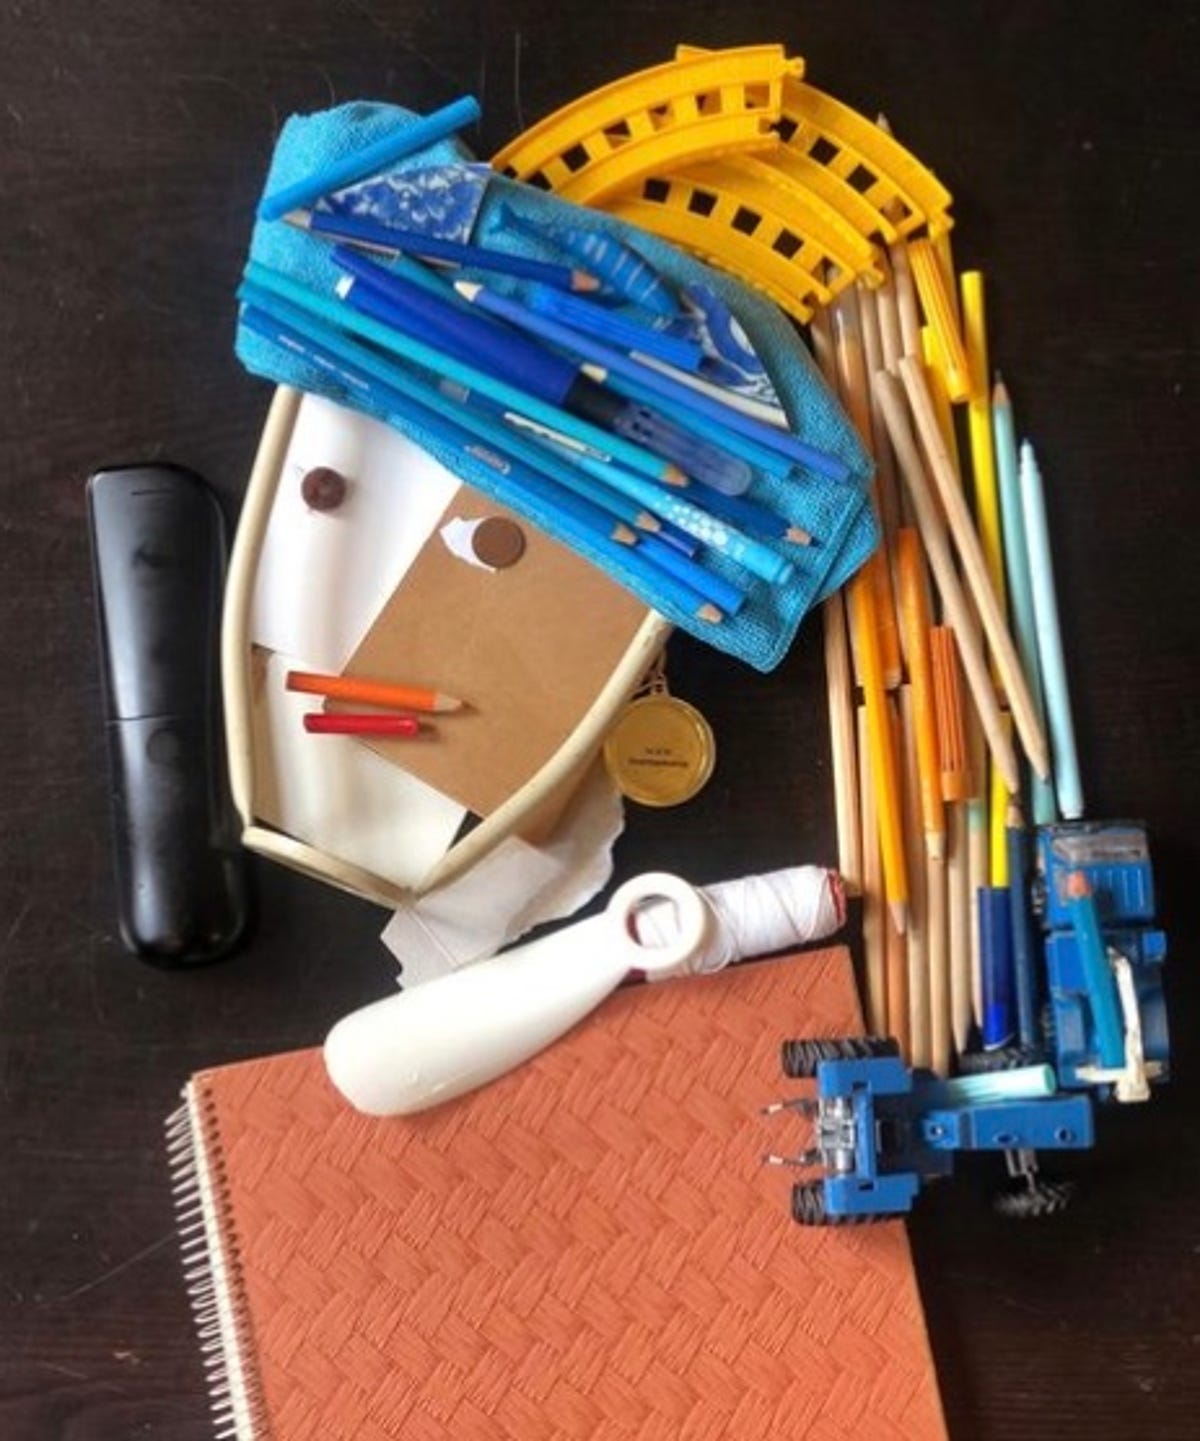 Pencils and other school supplies made in the shape of Girl With a Pearl Earring